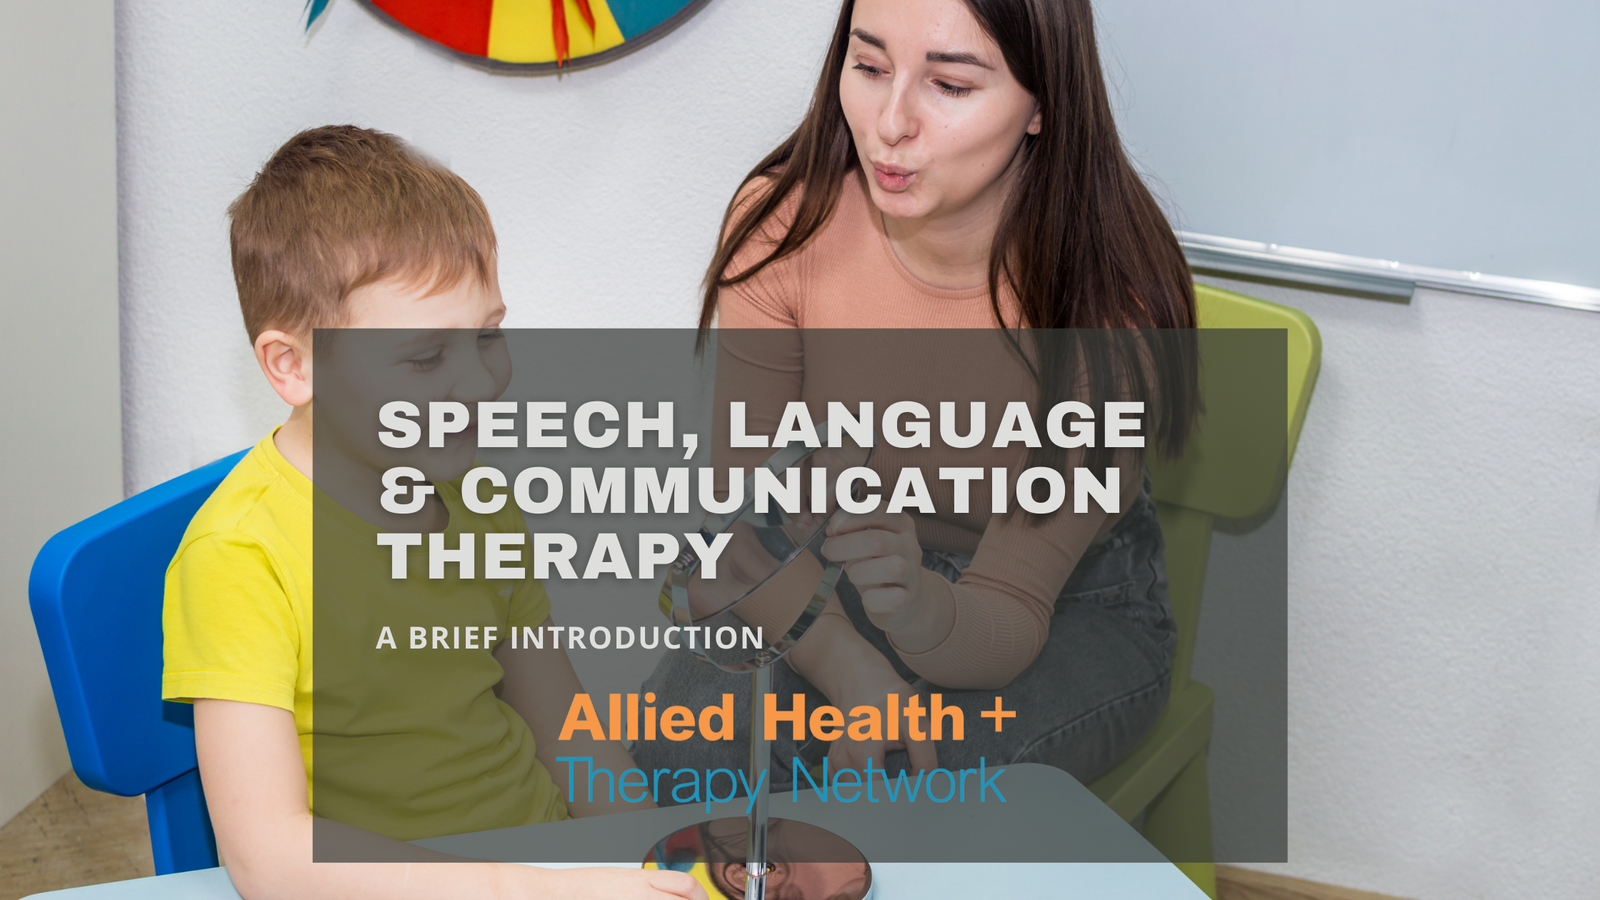 Communication and speech and language therapy